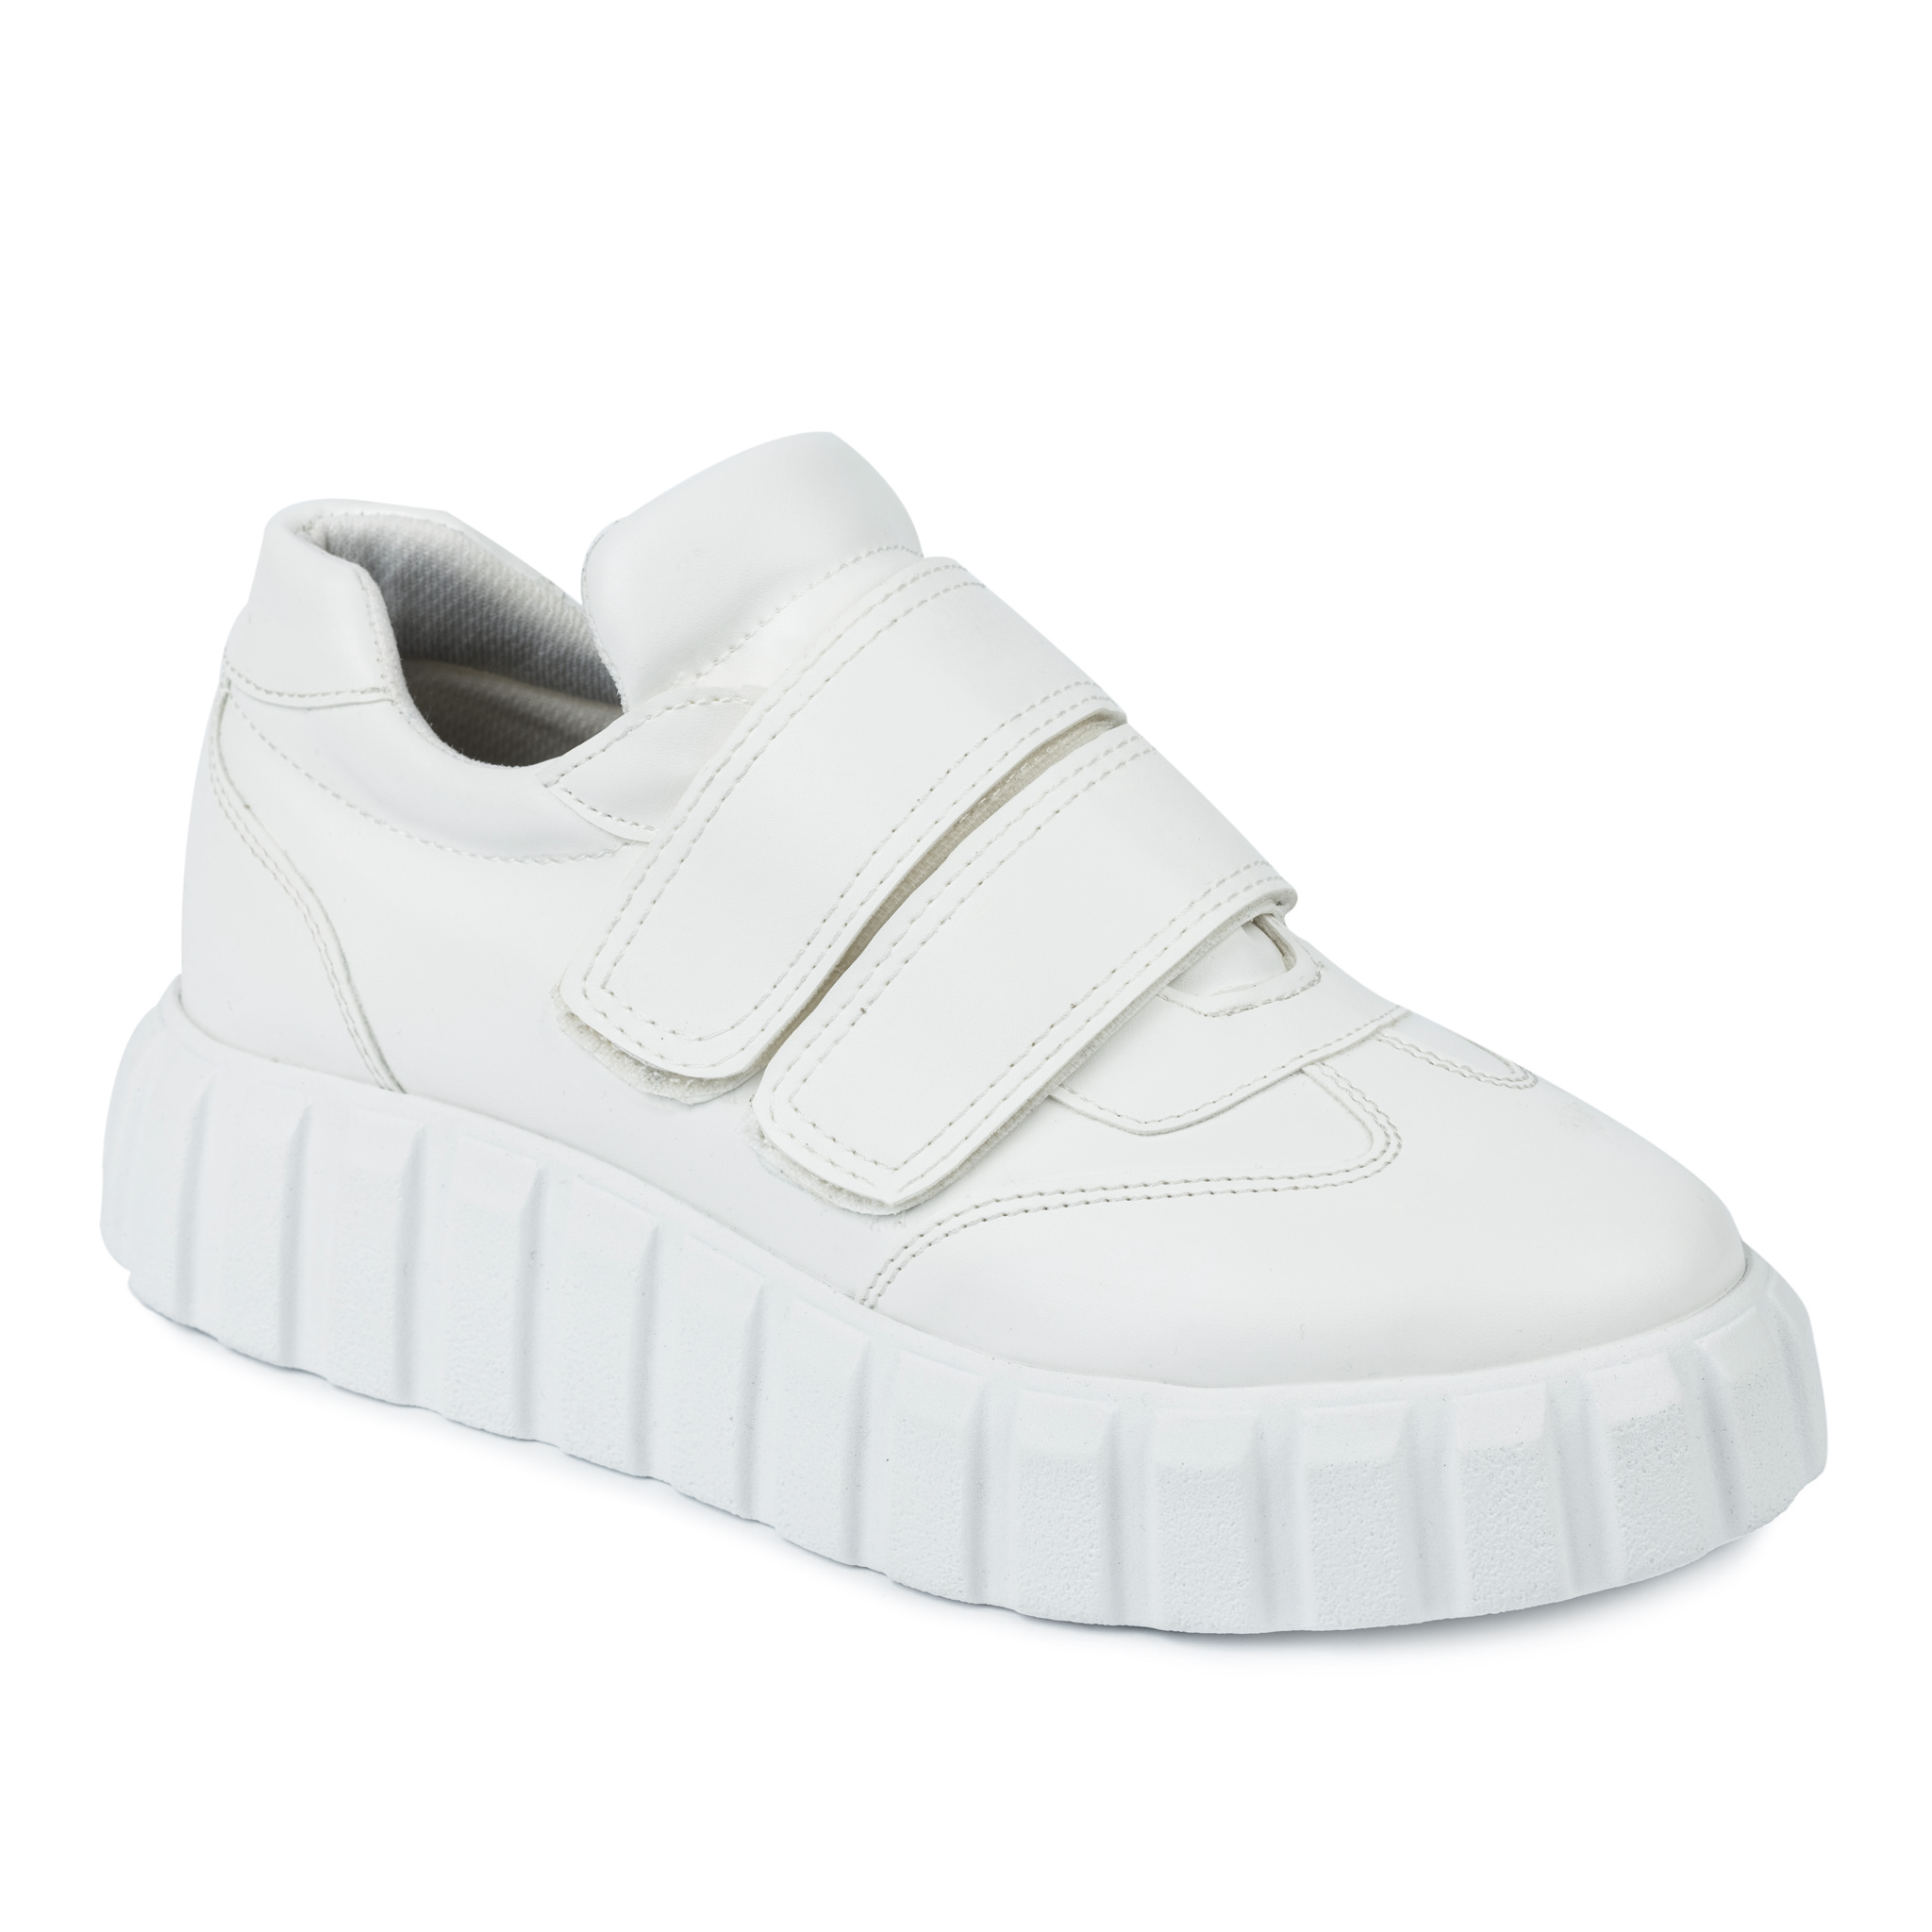 HIGH SOLE SNEAKERS WITH VELCRO BAND - WHITE